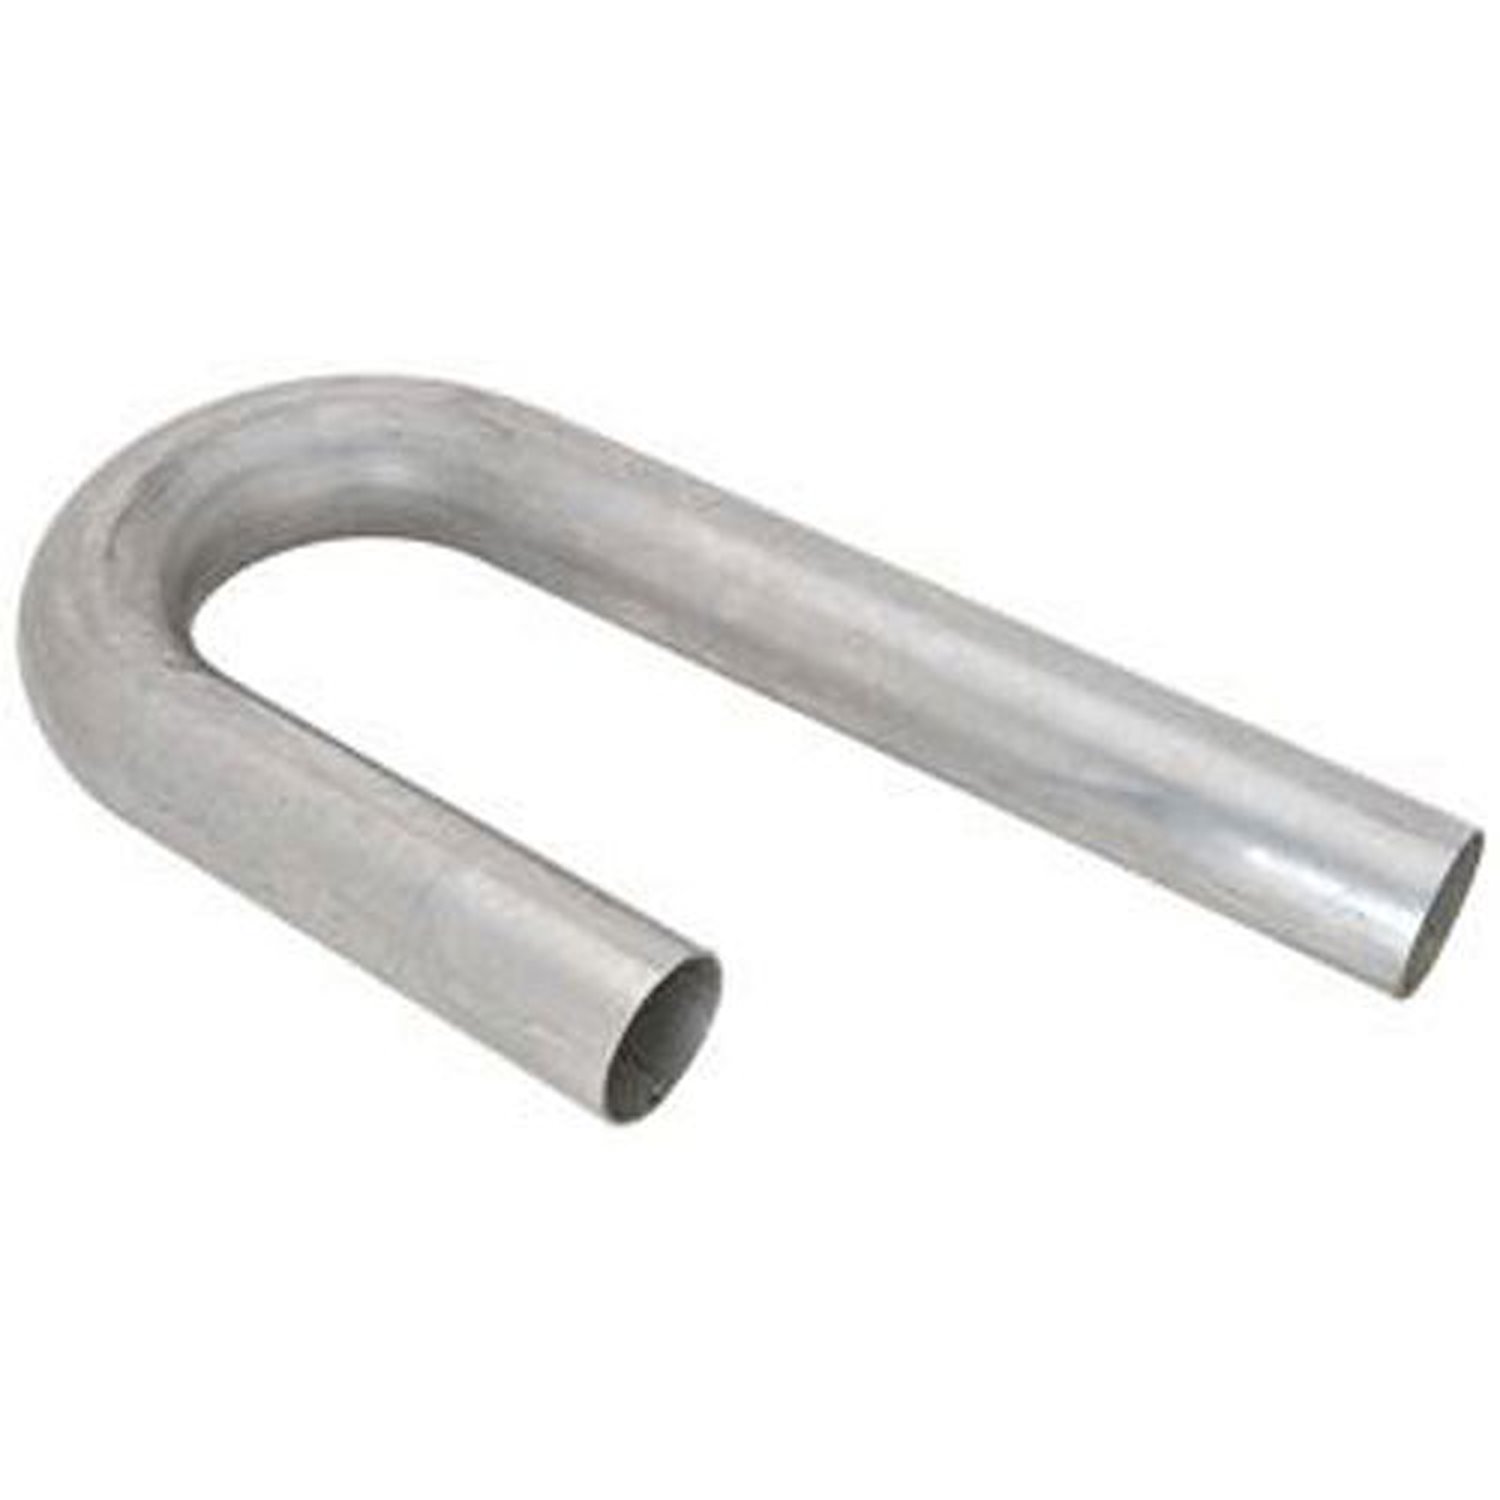 Stainless Steel 2-1/2" J-Bend